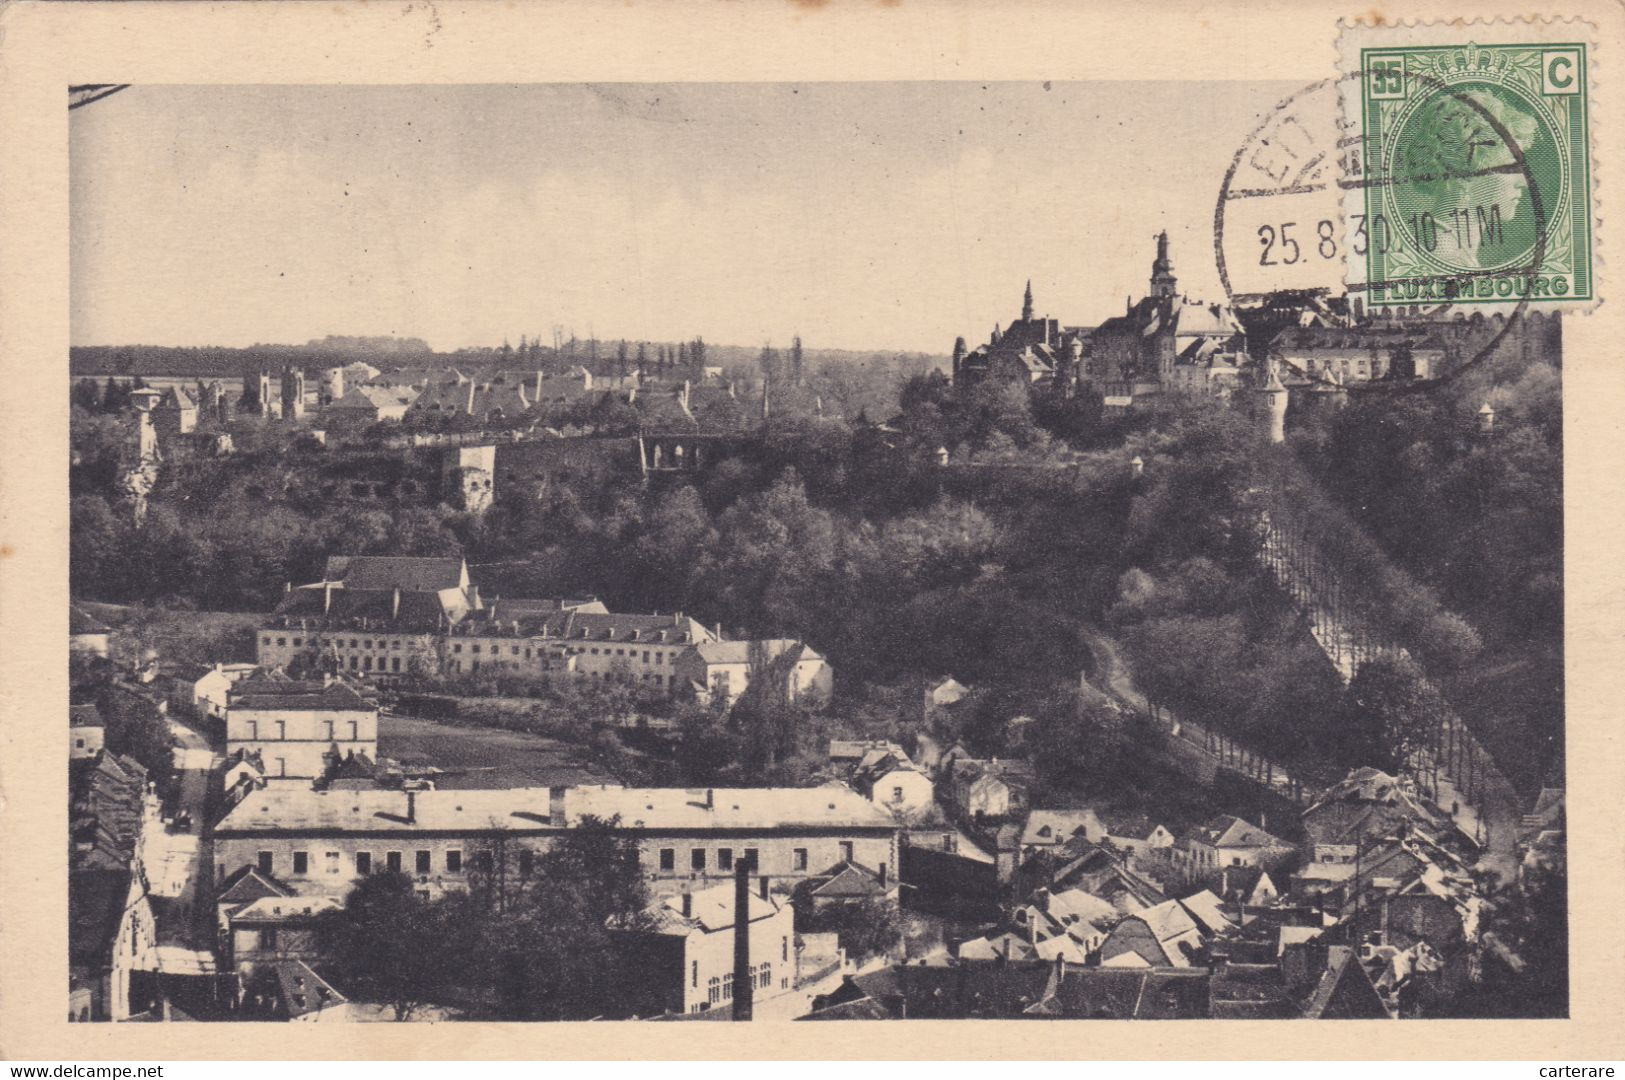 LUXEMBOURG,1930 - Luxemburg - Town